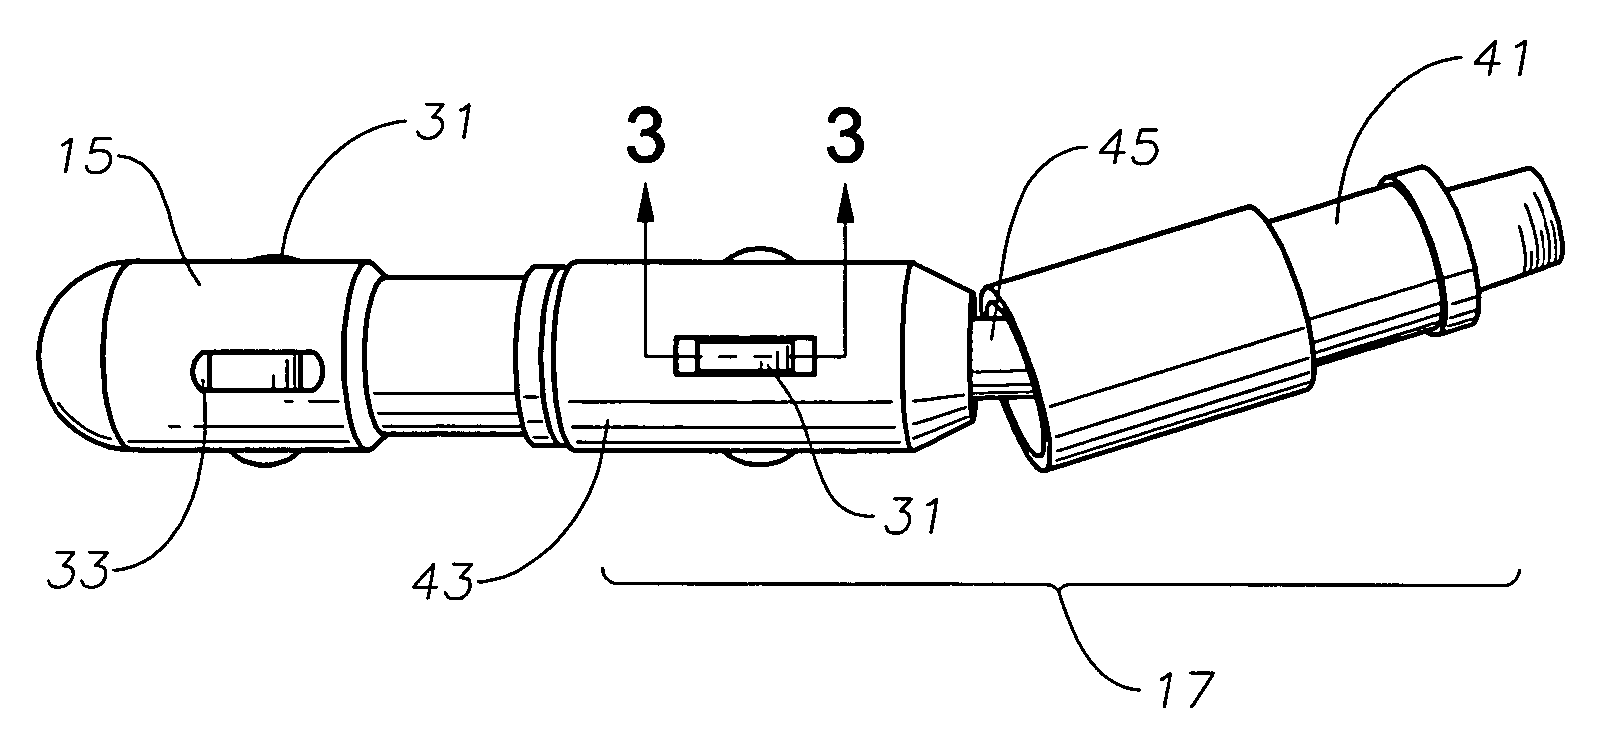 System, method, and apparatus for survey tool having roller knuckle joints for use in highly deviated horizontal wells